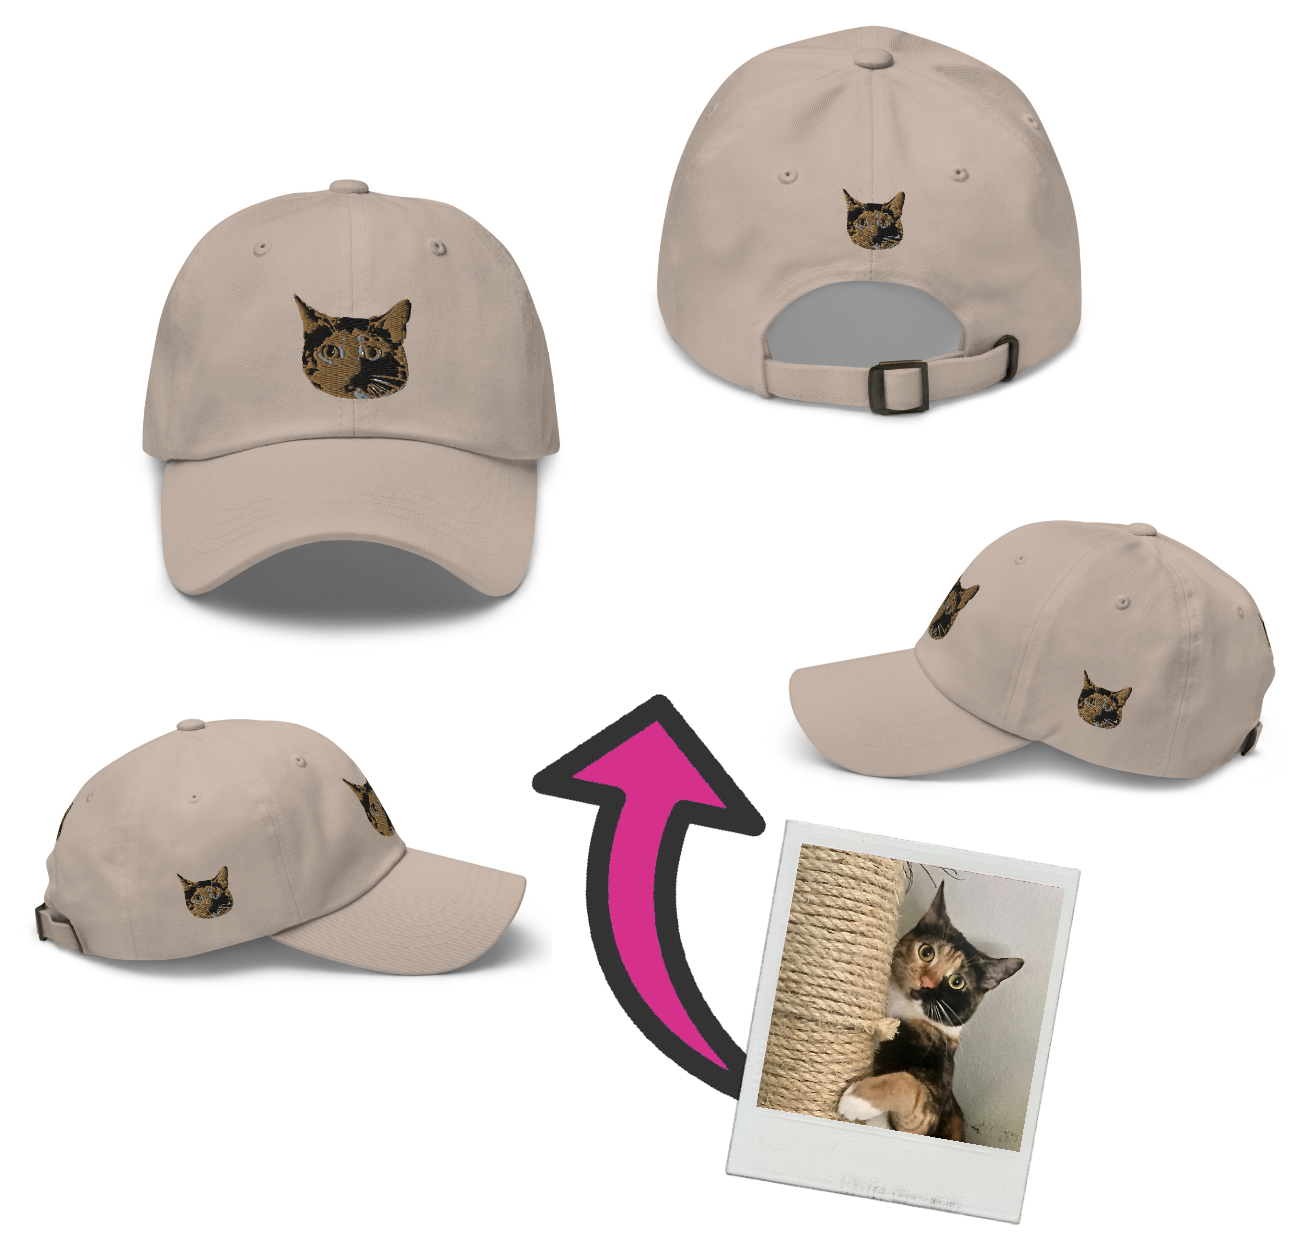 Custom Photo Embroidered Hat, Personalized Dad Hat, Baseball Cap, Design your own hat, add photo, logo, artwork, design 4 sides, custom gift